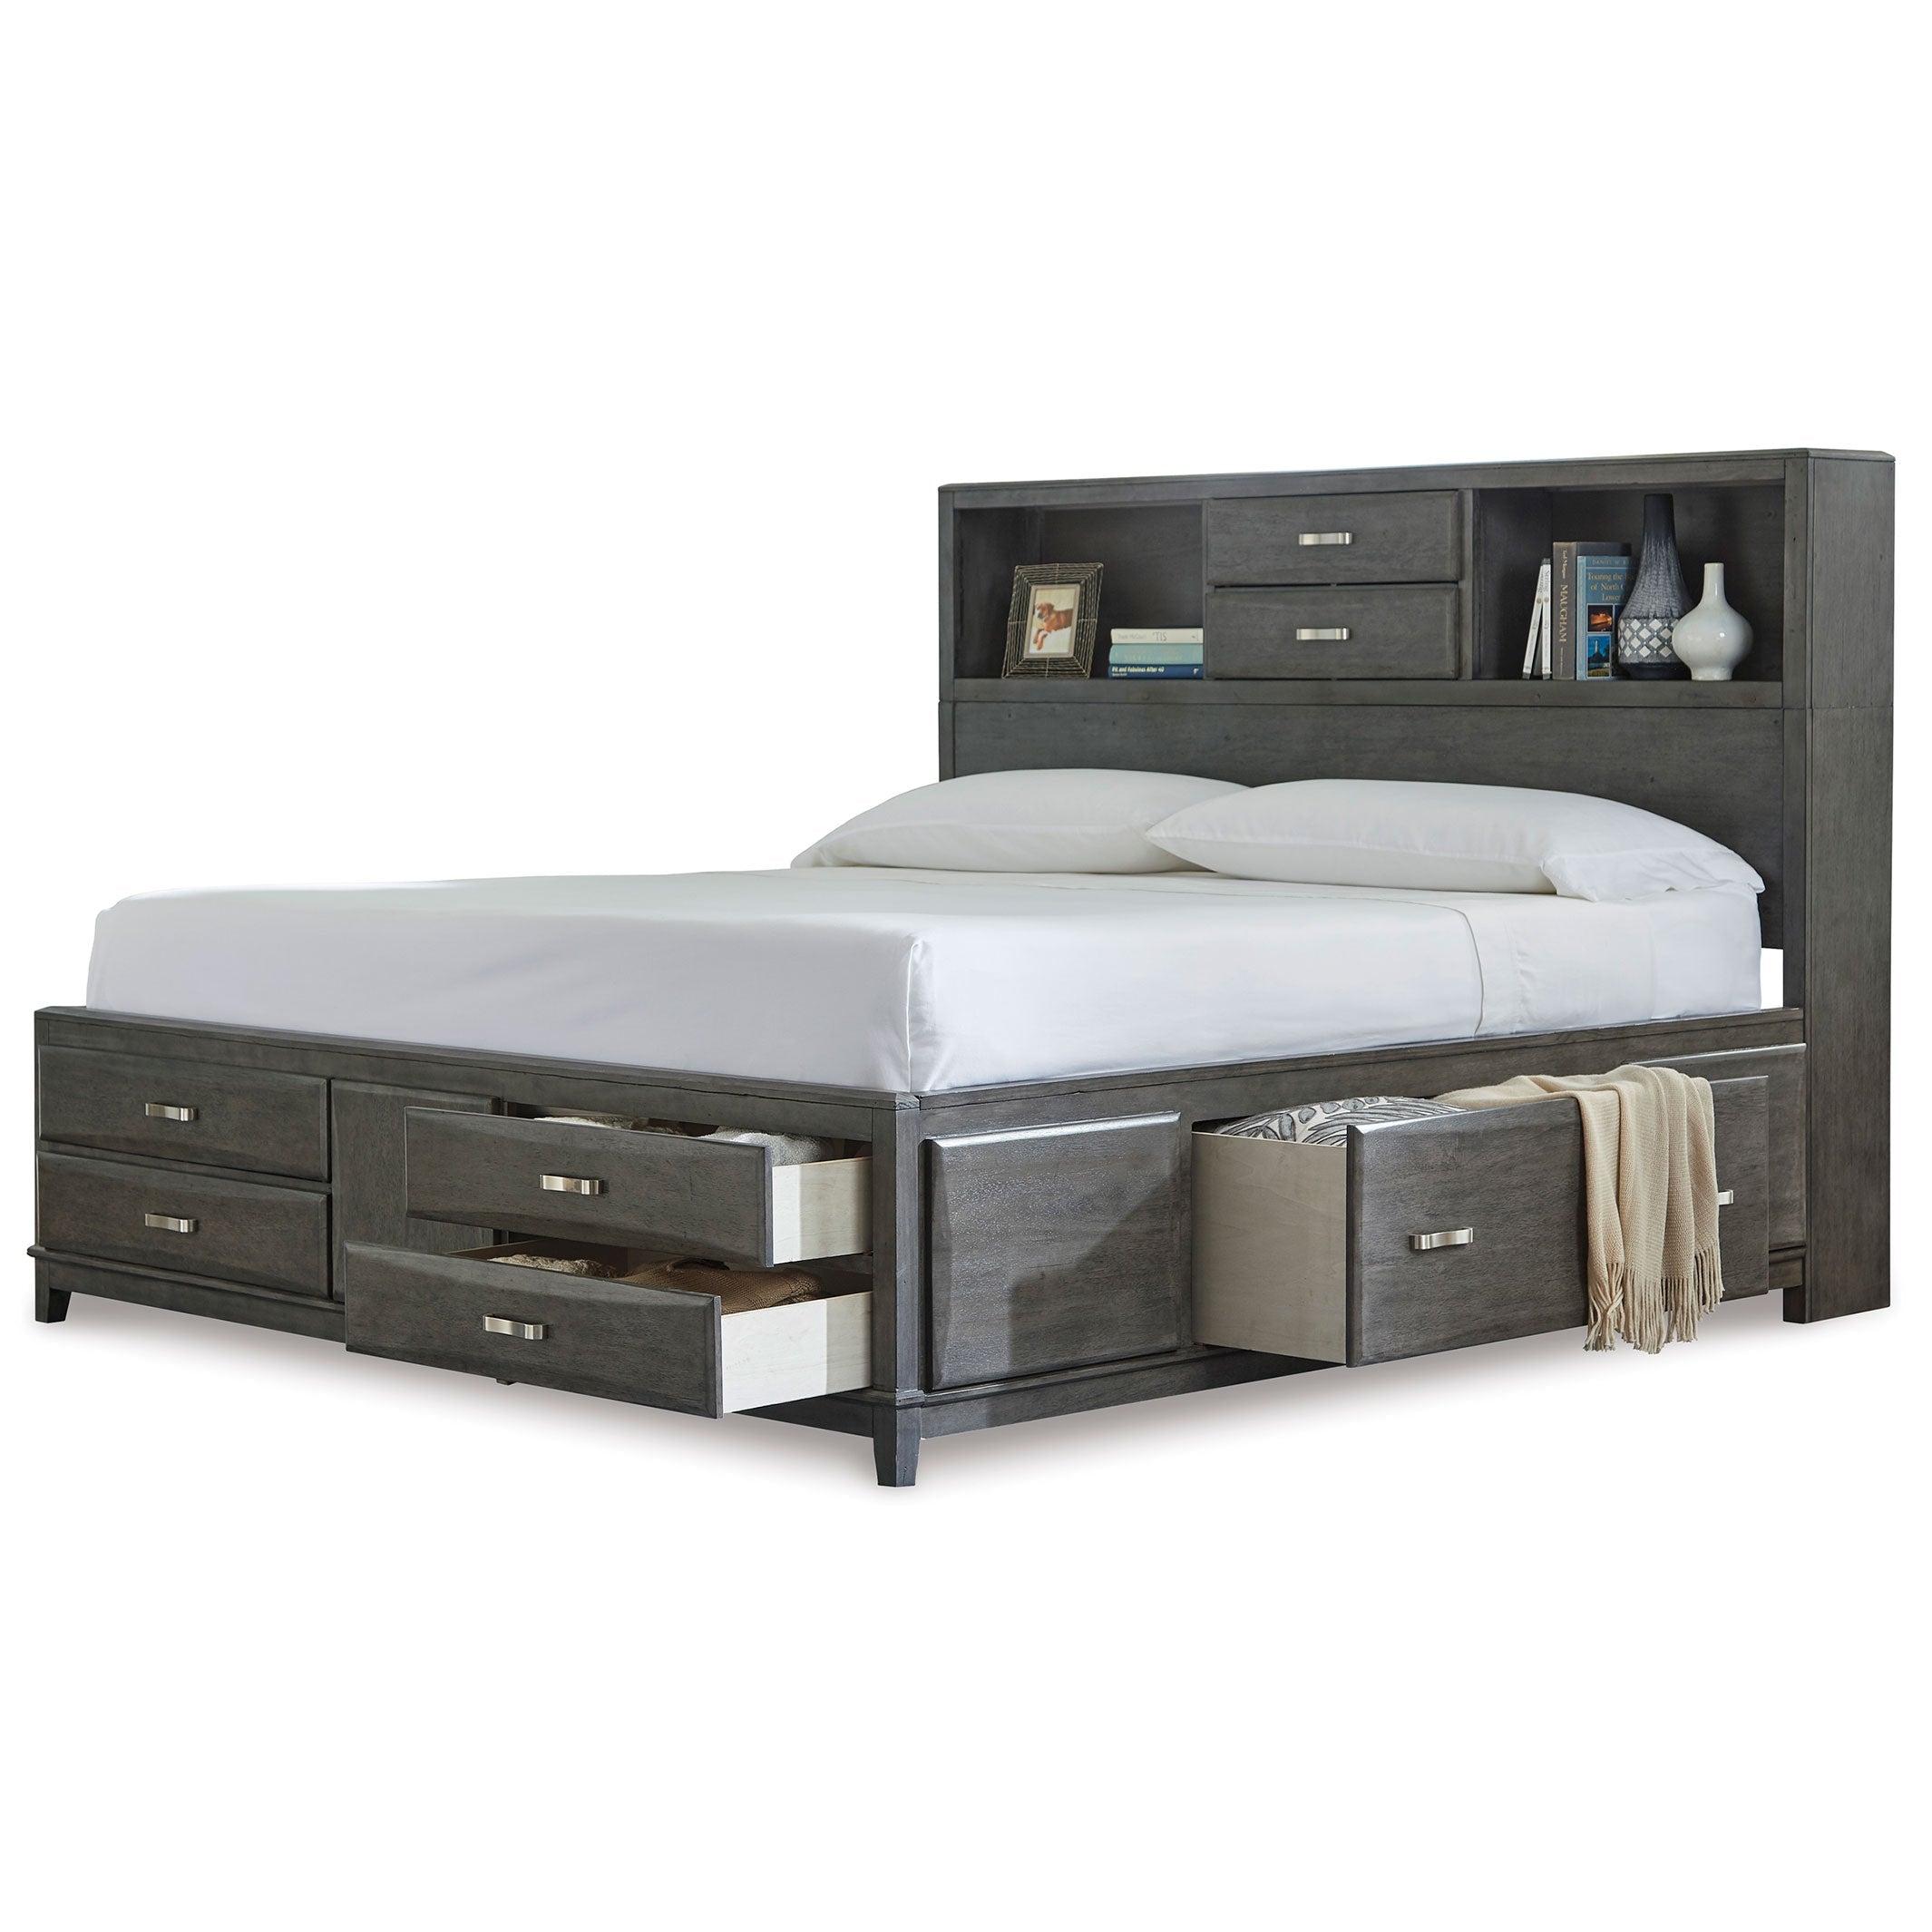 Caitbrook King Storage Bed with 8 Drawers